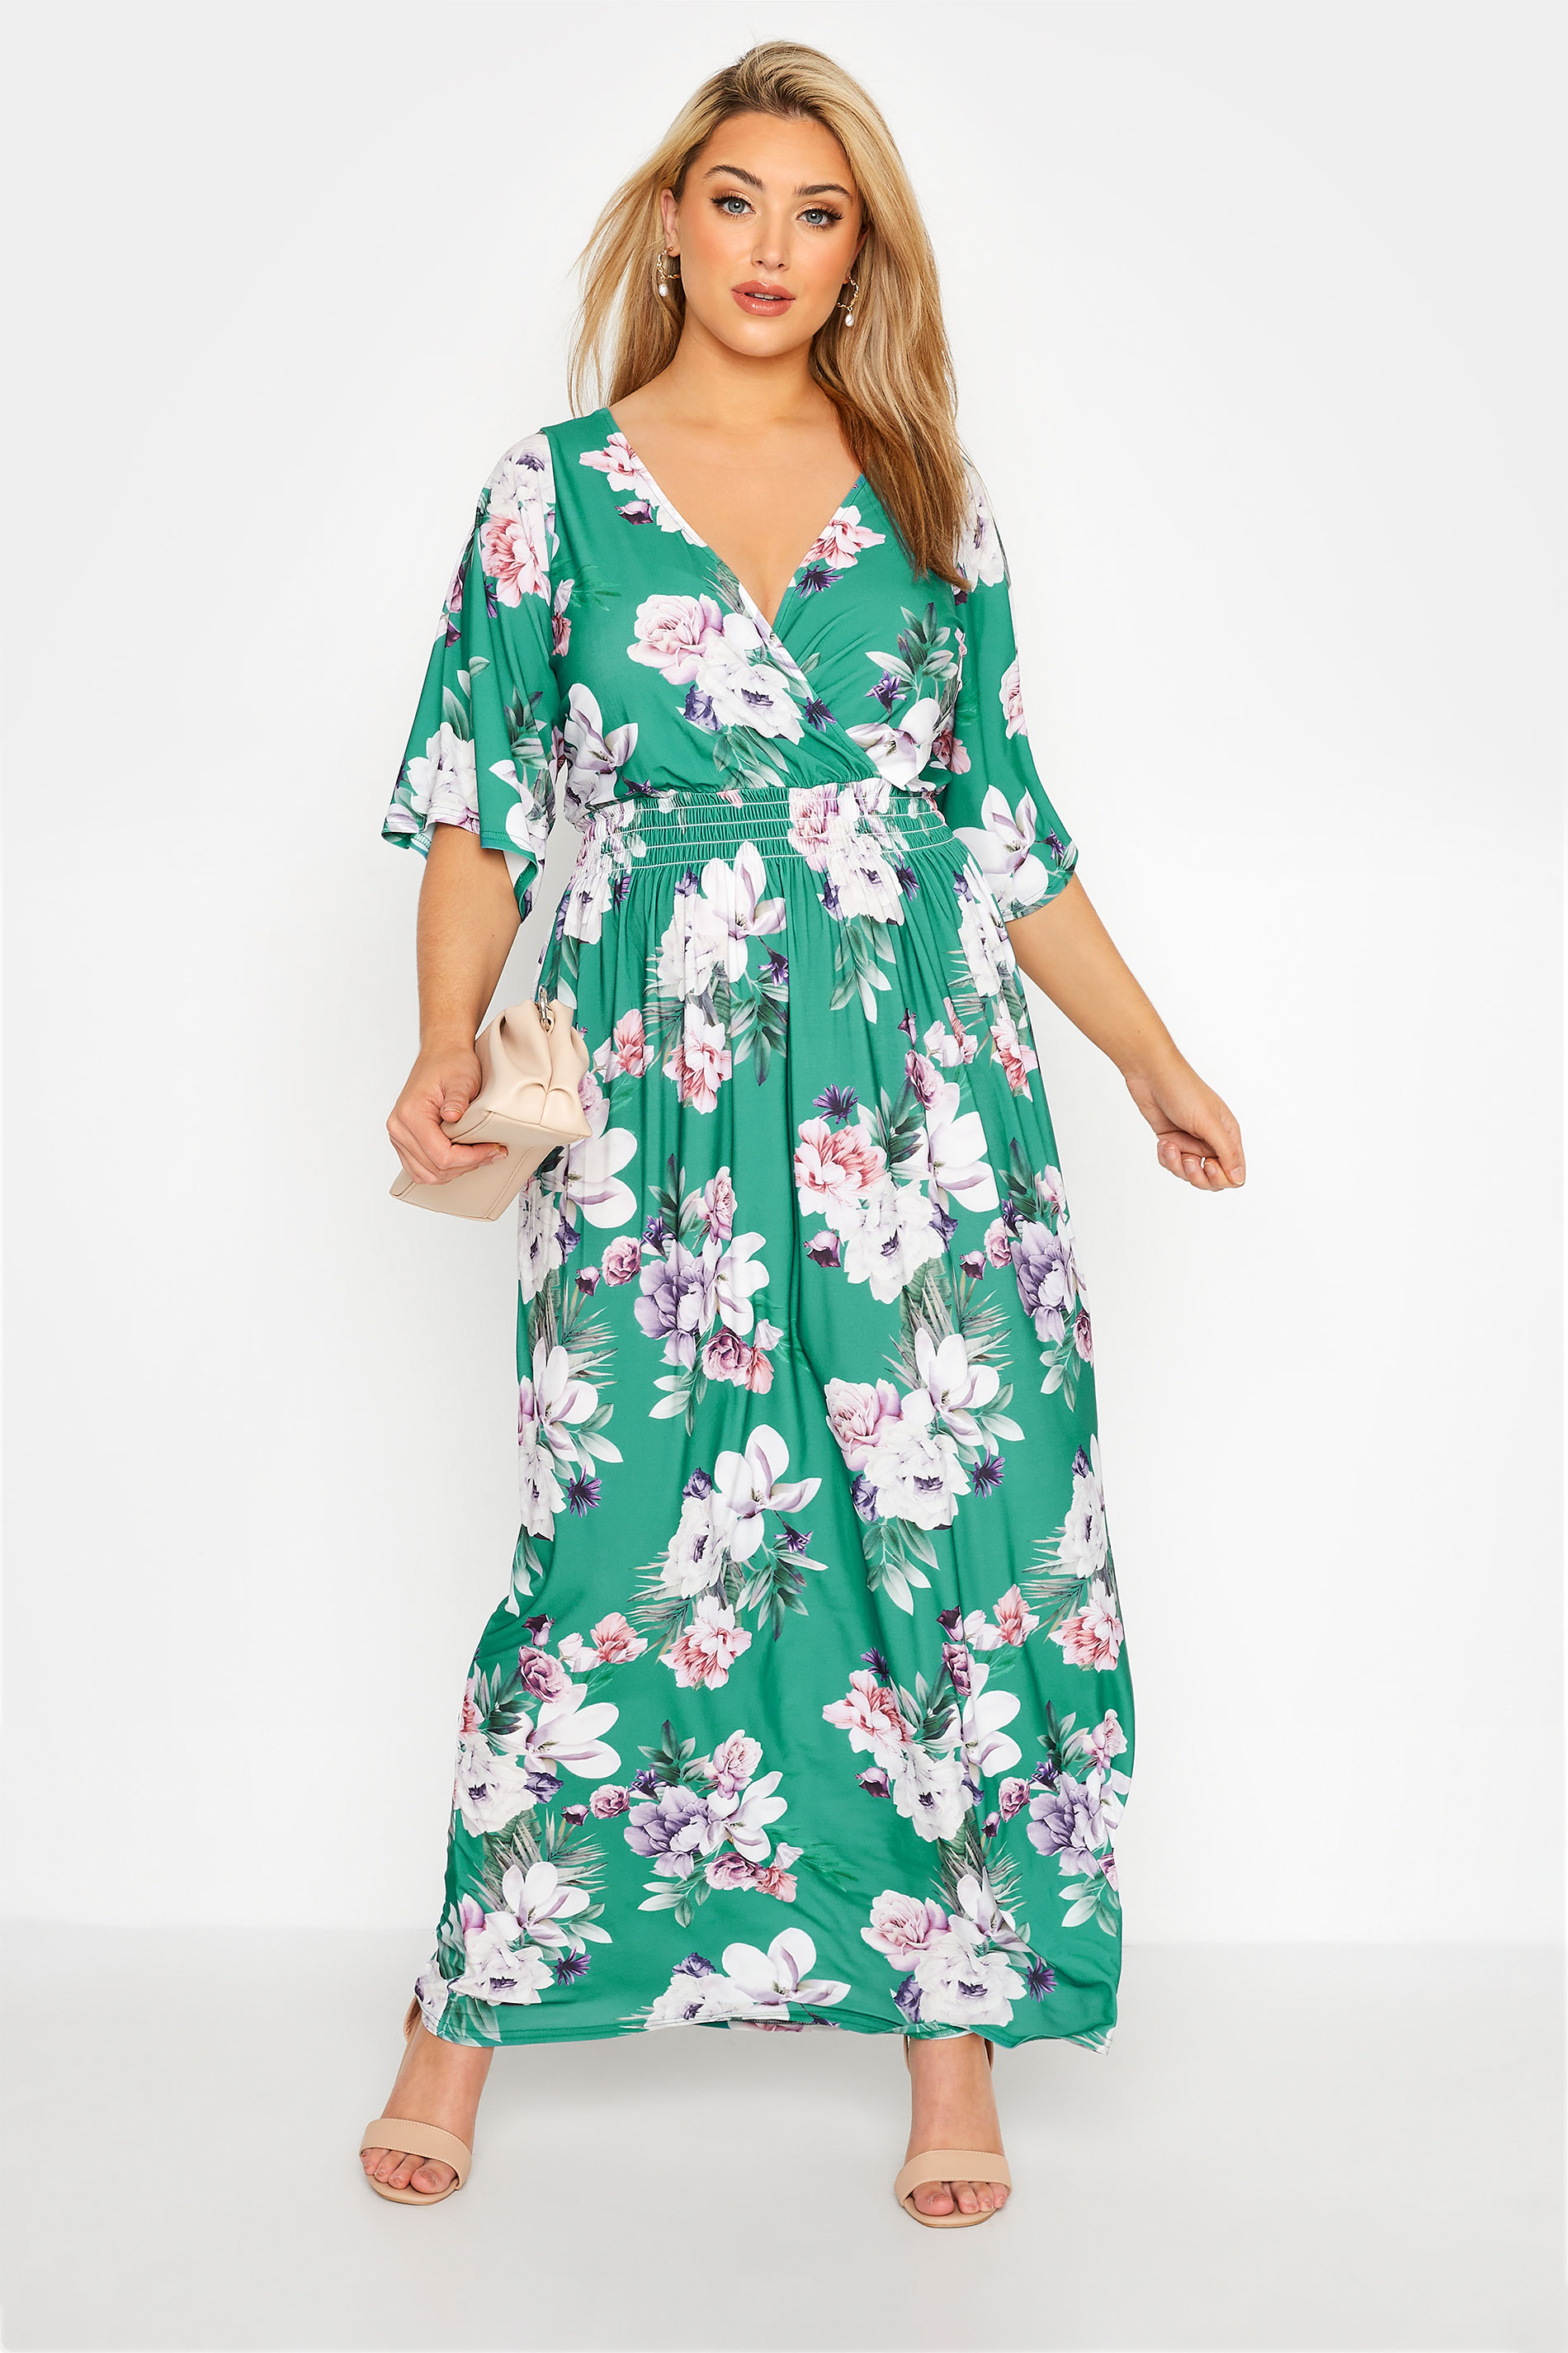 Robes Grande Taille Grande taille  Robes Longues | YOURS LONDON - Robe Cache-Coeur Floral Verte Maxi - UJ18584